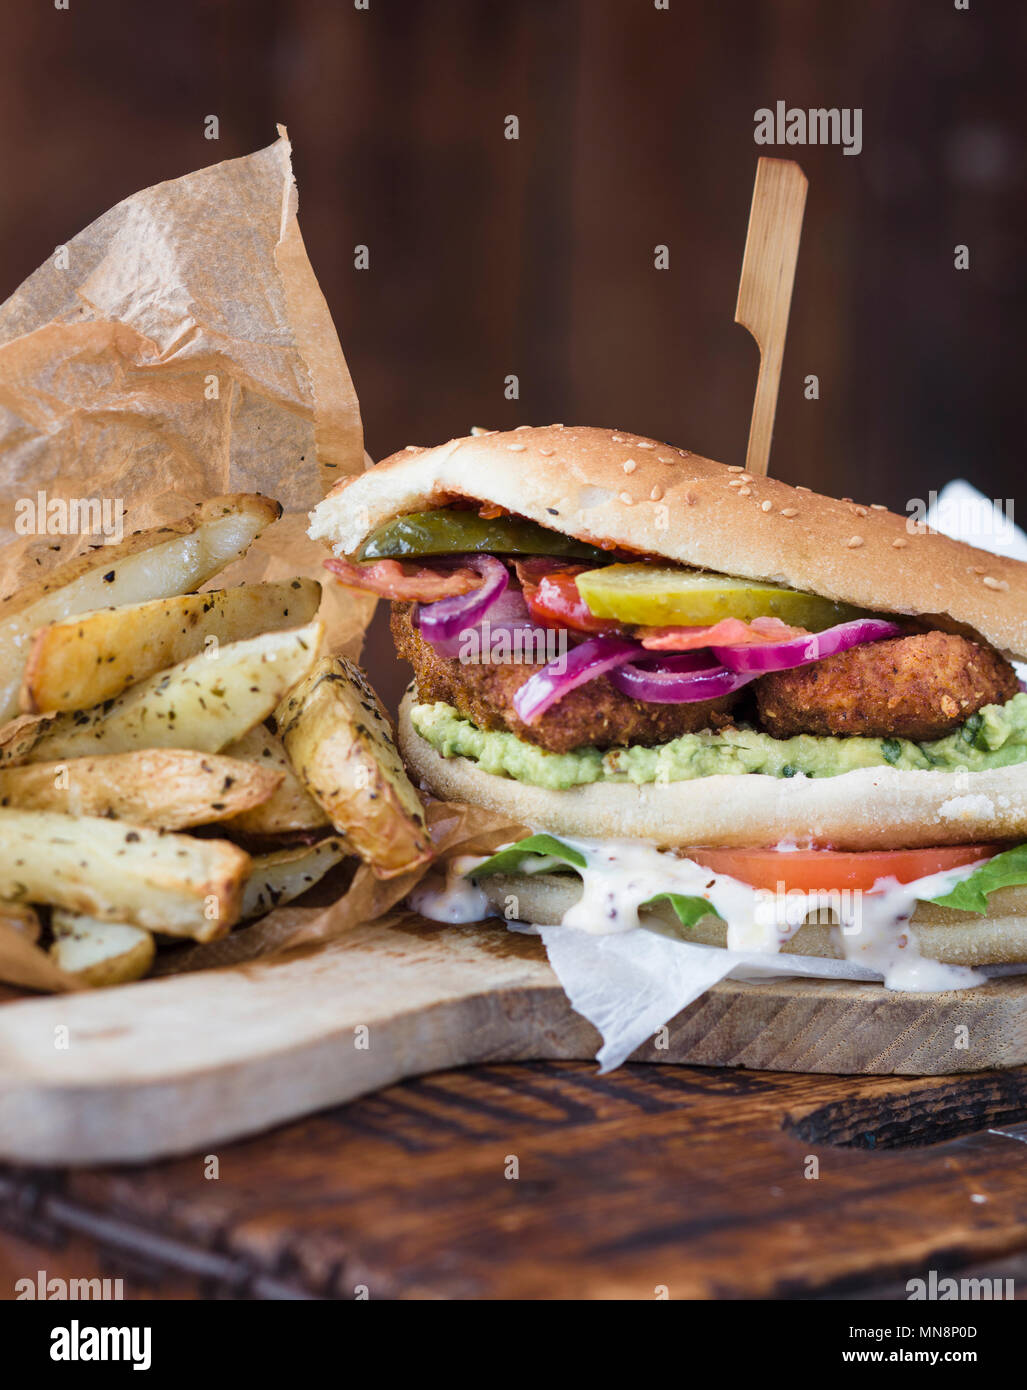 Chicken Escalope sandwich with salad and homemade oven chips Stock Photo